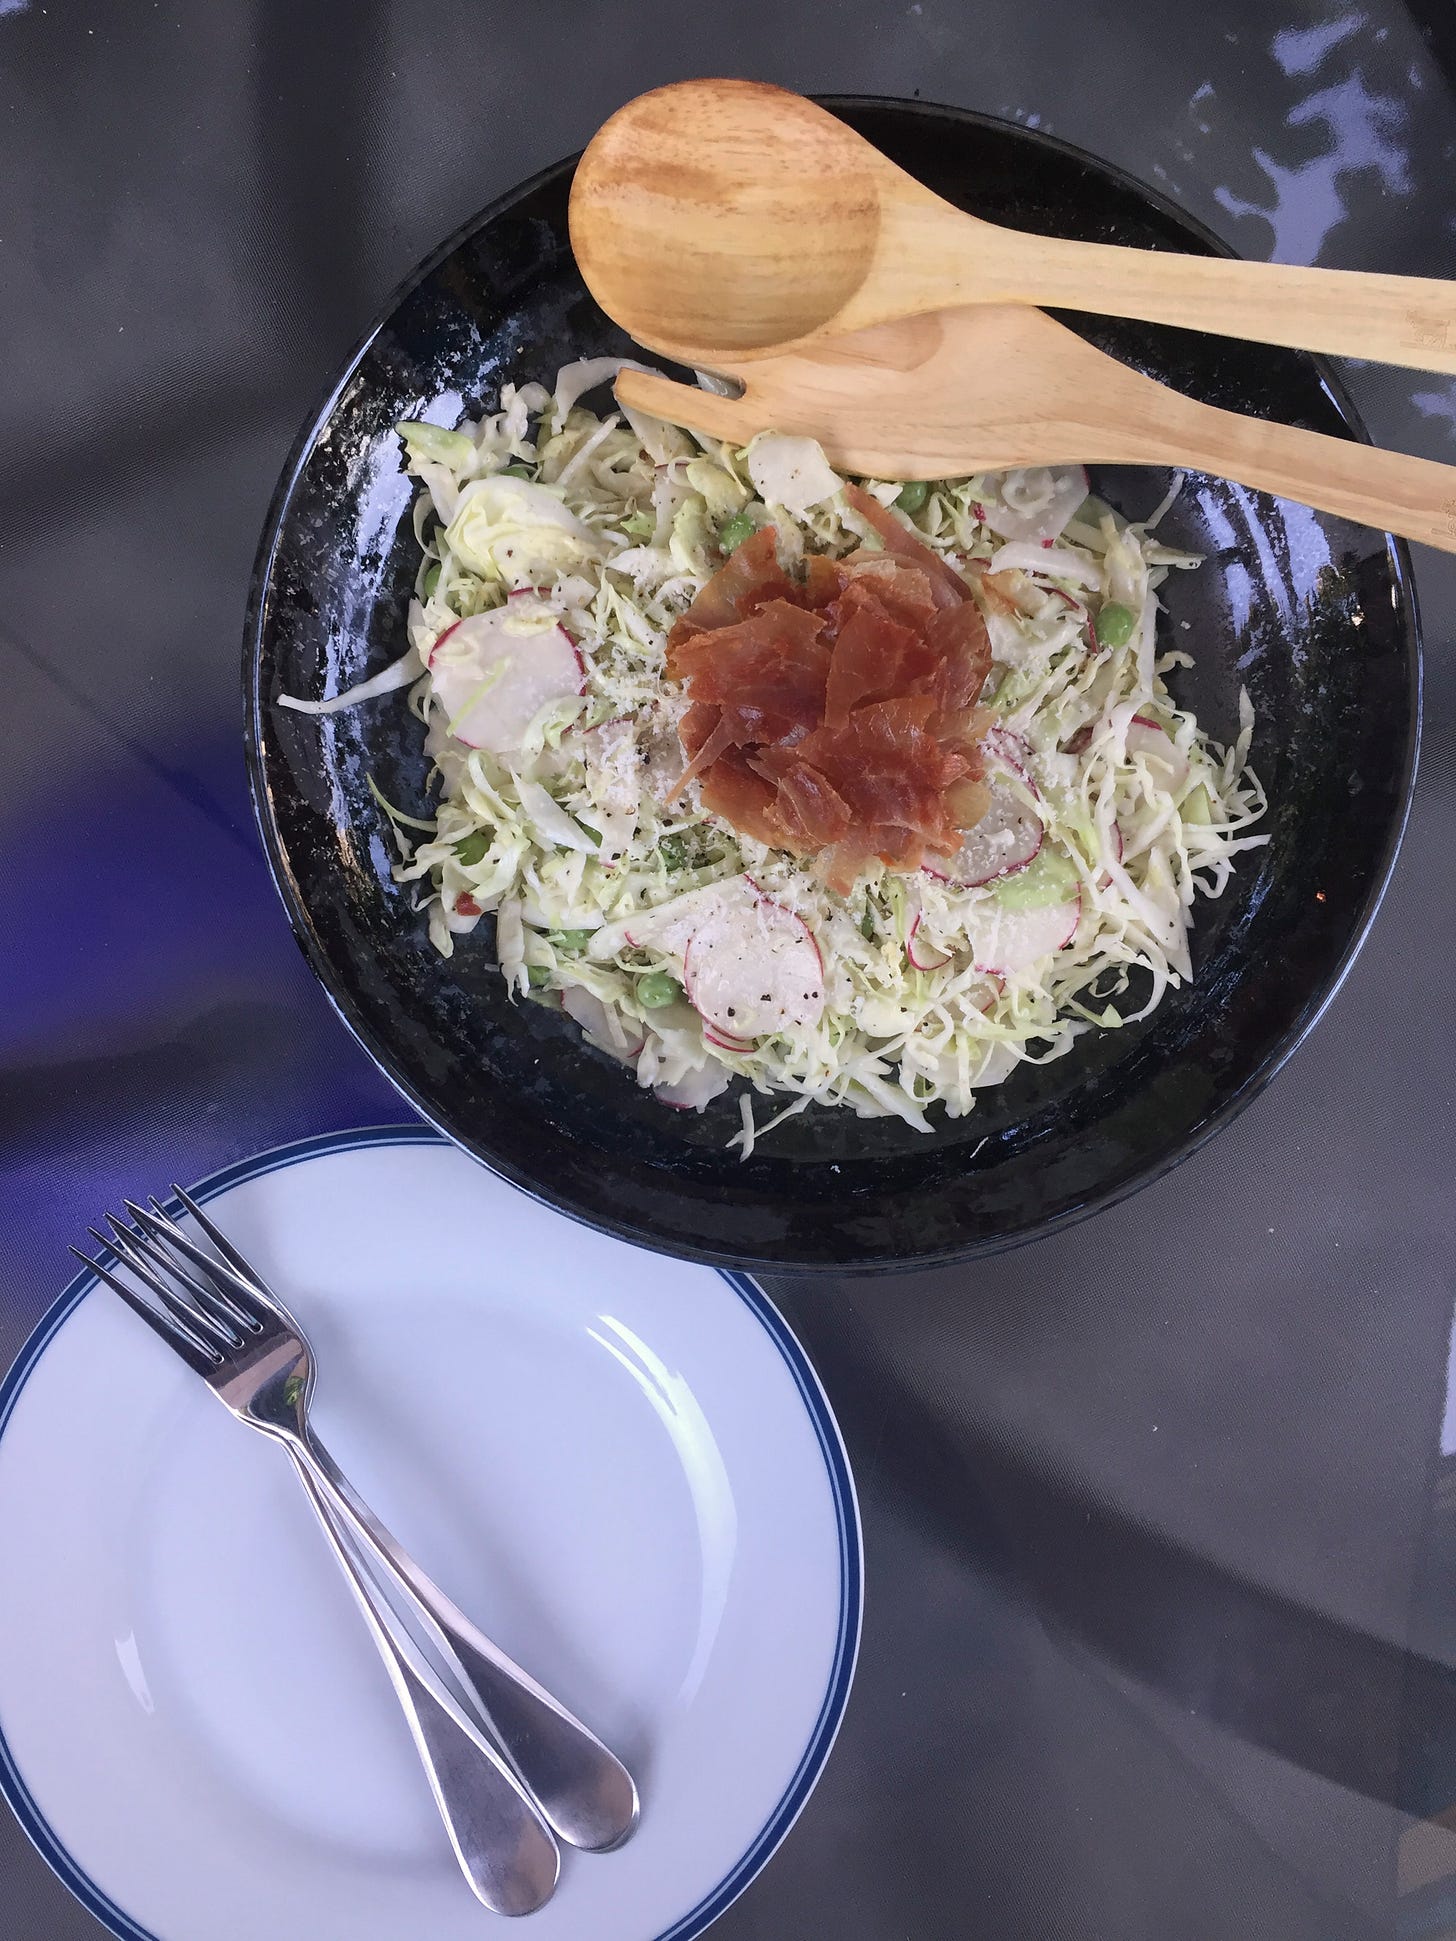 On an outdoor glass table, a shallow black dish of thinly sliced cabbages and radishes in a creamy dressing, with large green peas peppered throughout. A small pile of crumbled prosciutto sits at the centre, and salad utensils rest at the edge of the bowl. Two salad plates with forks on top are in the bottom left corner of the photo.